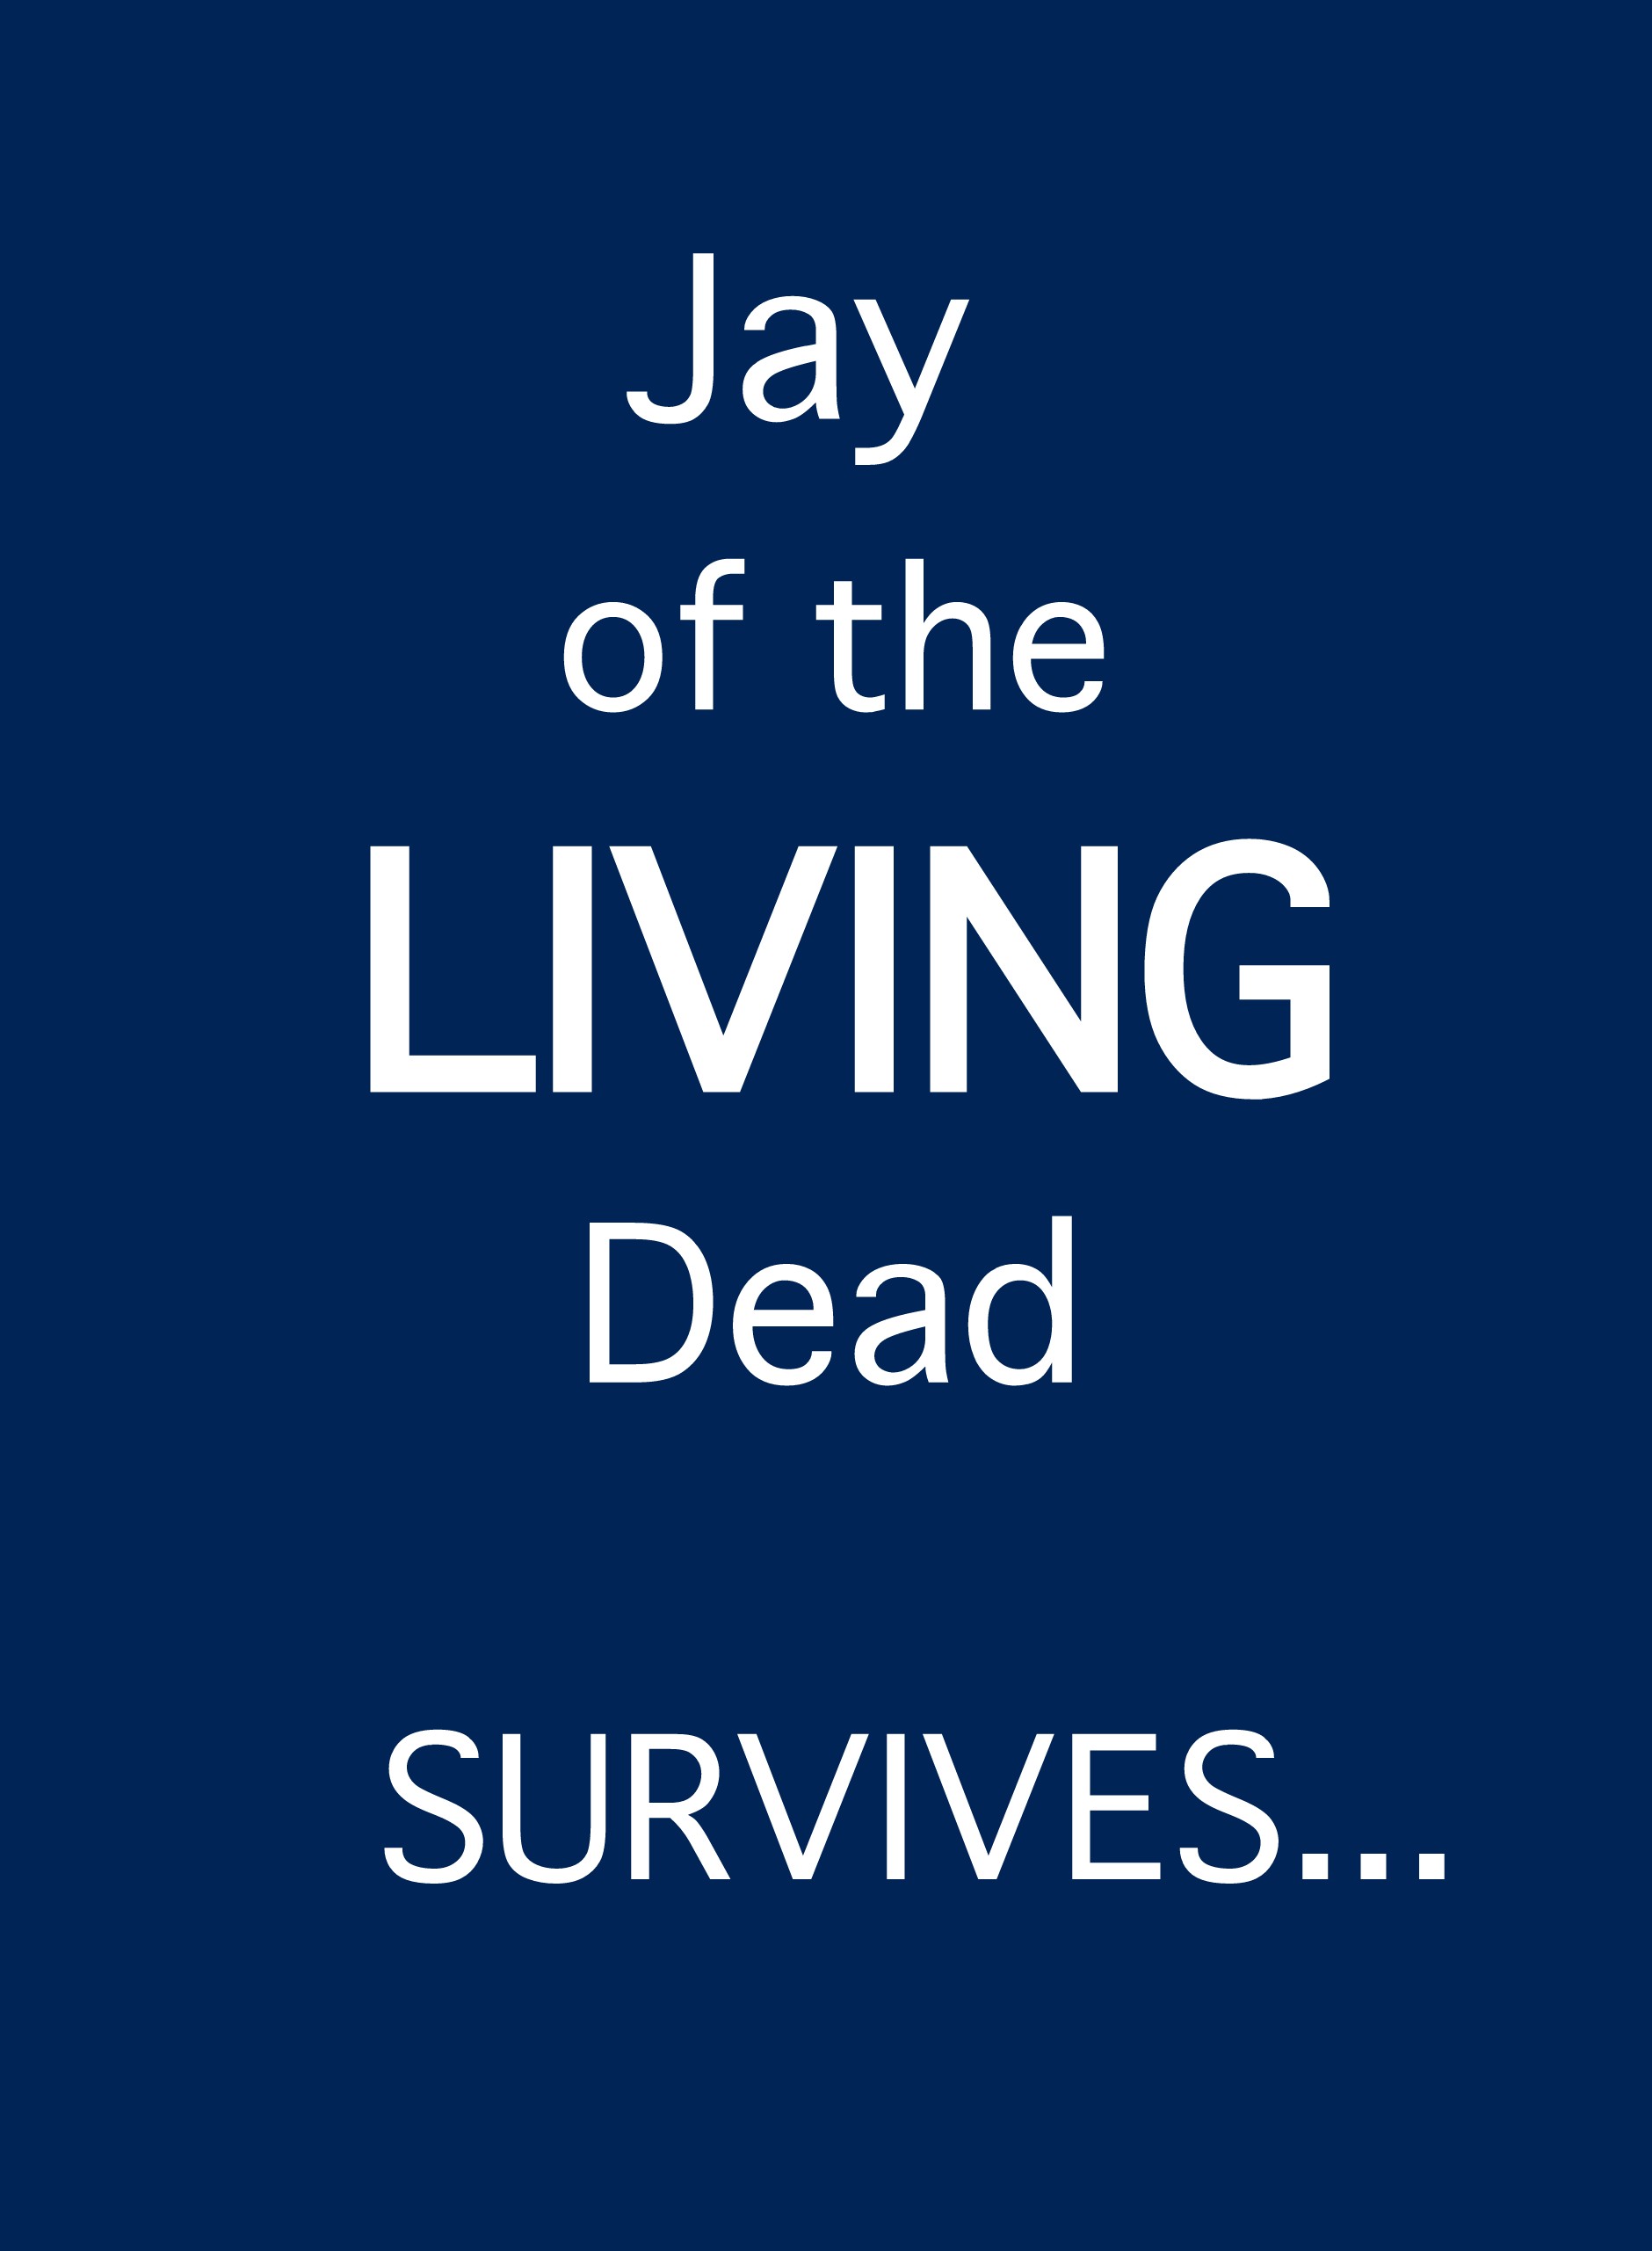 Jay of the Living Dead survives poster